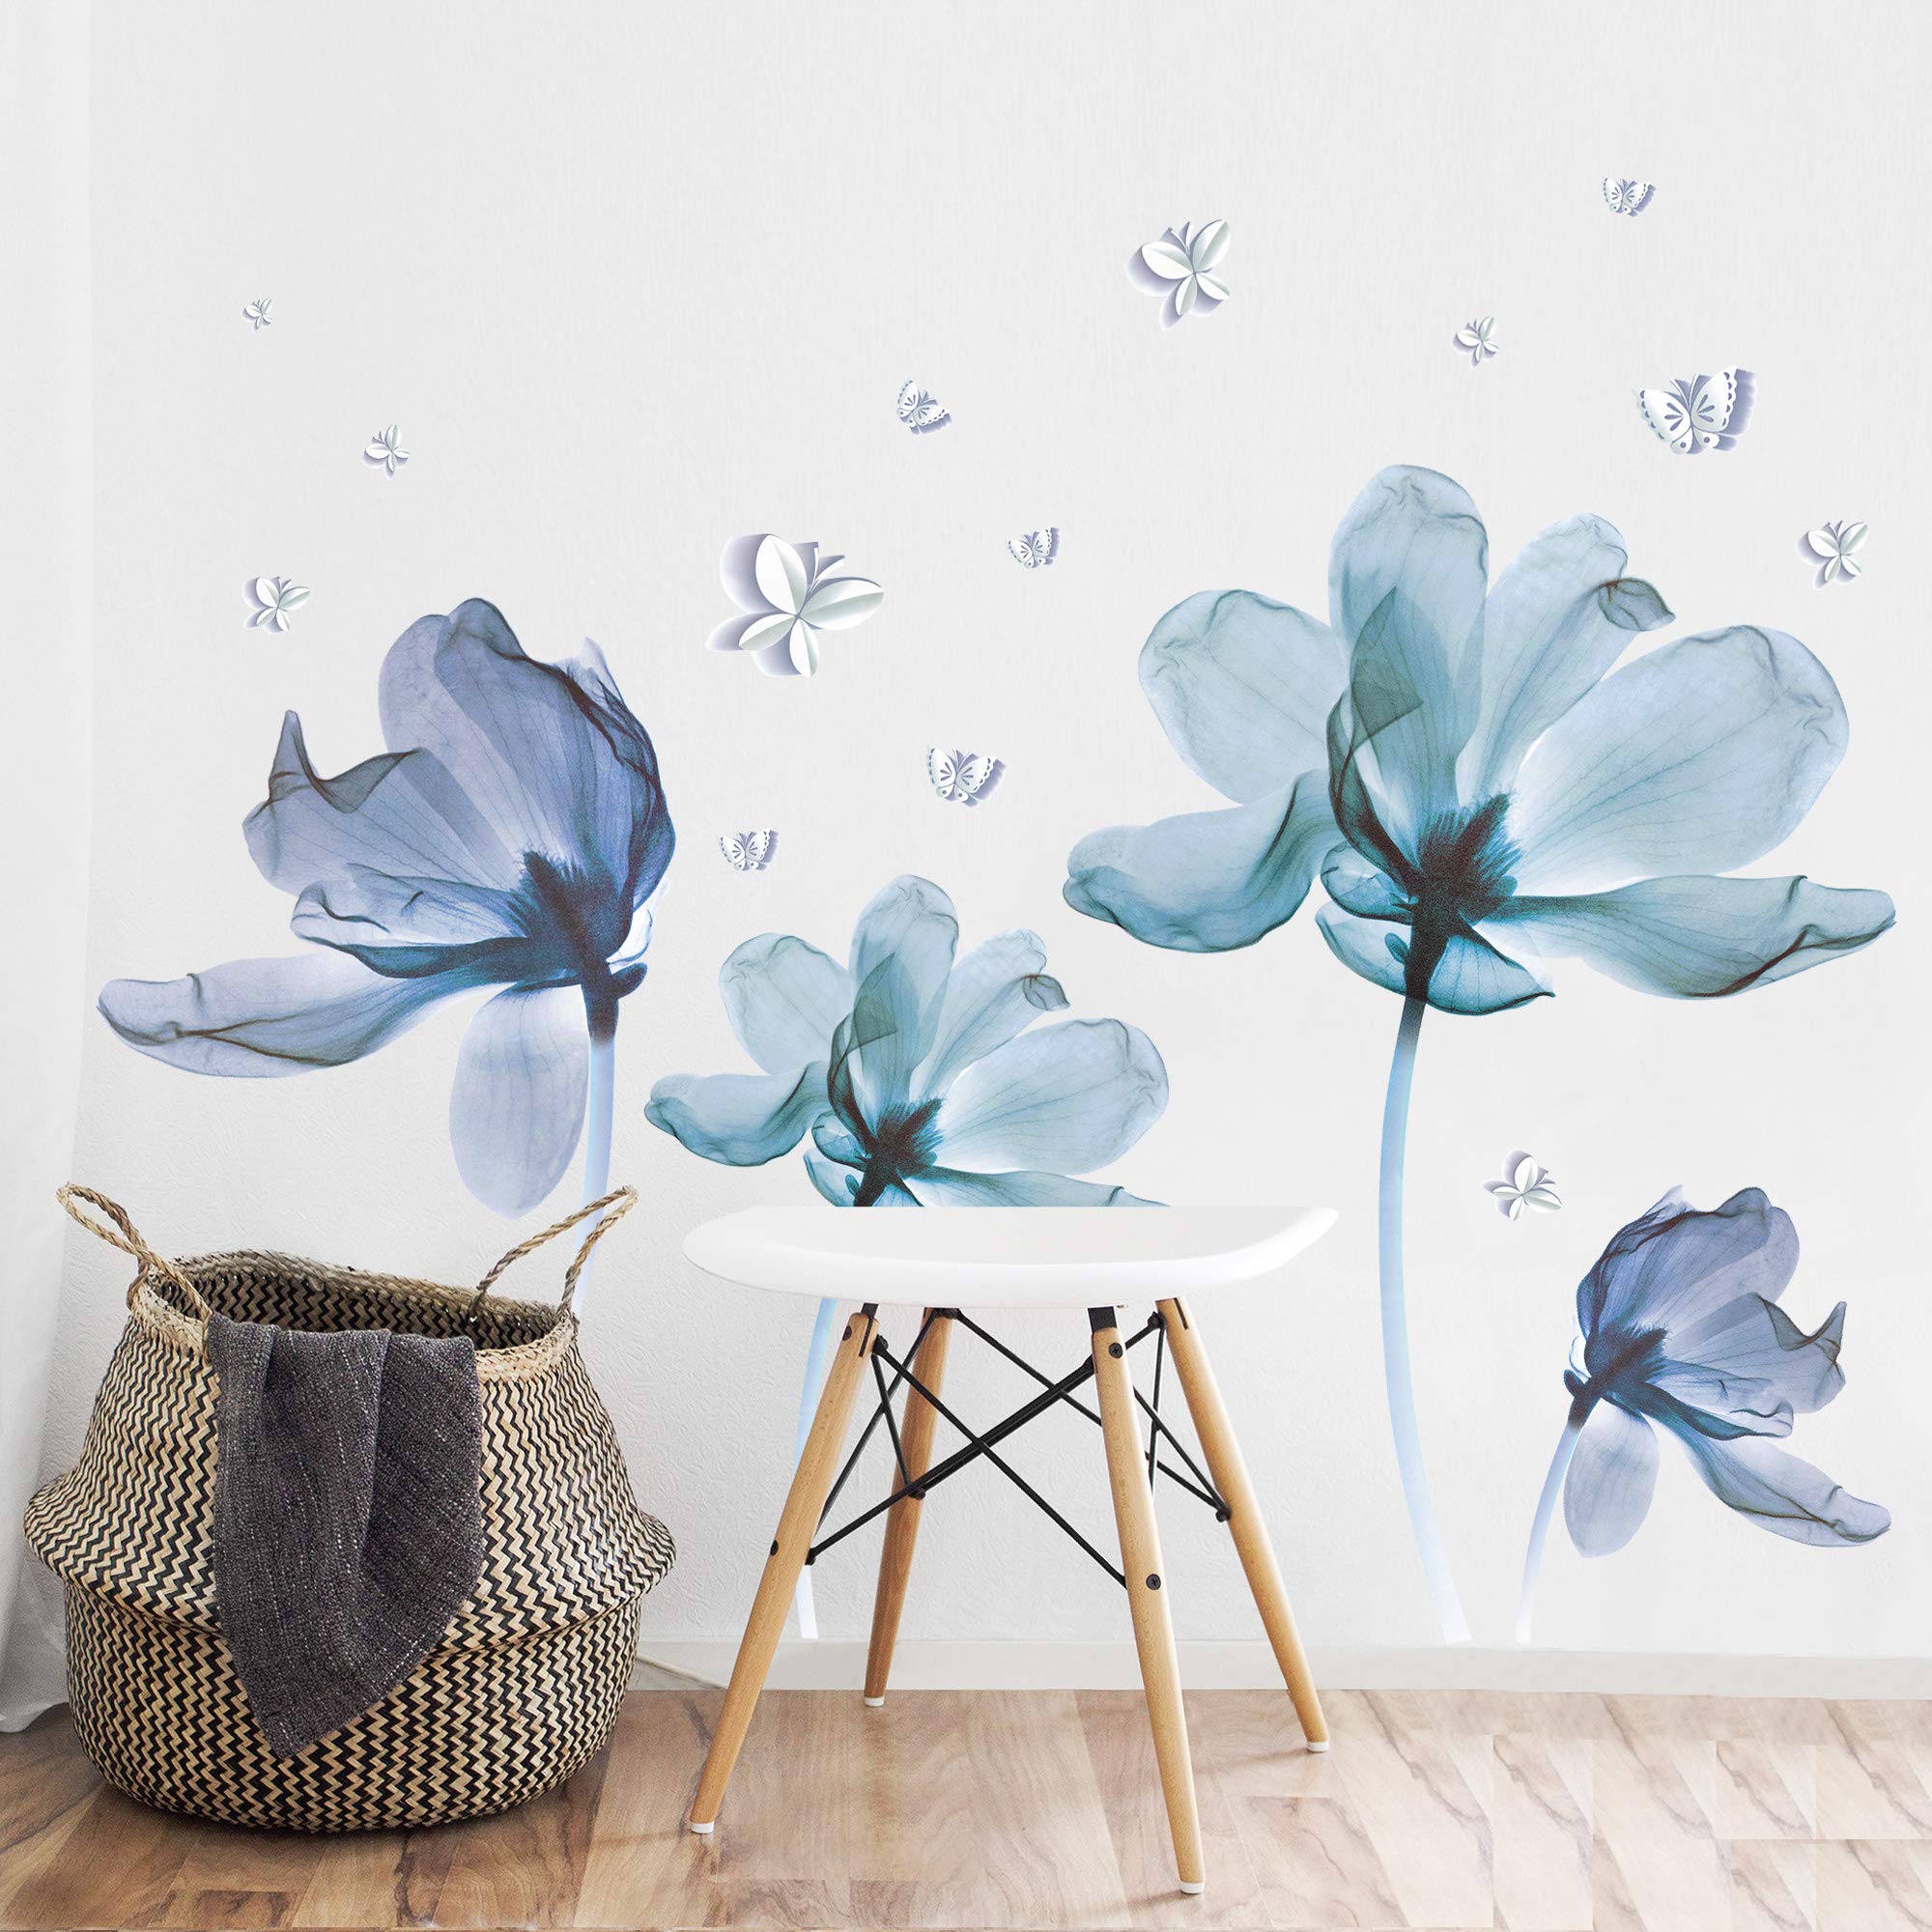 Gaint Creative Removable 3D Nusery Flower Wall Decals DIY Romantic Floral Wall Sticker Murals Flowers Art Decor for Kids Girls Teens Bedroom Office Living Room Home Wall Decoration (Light Blue)